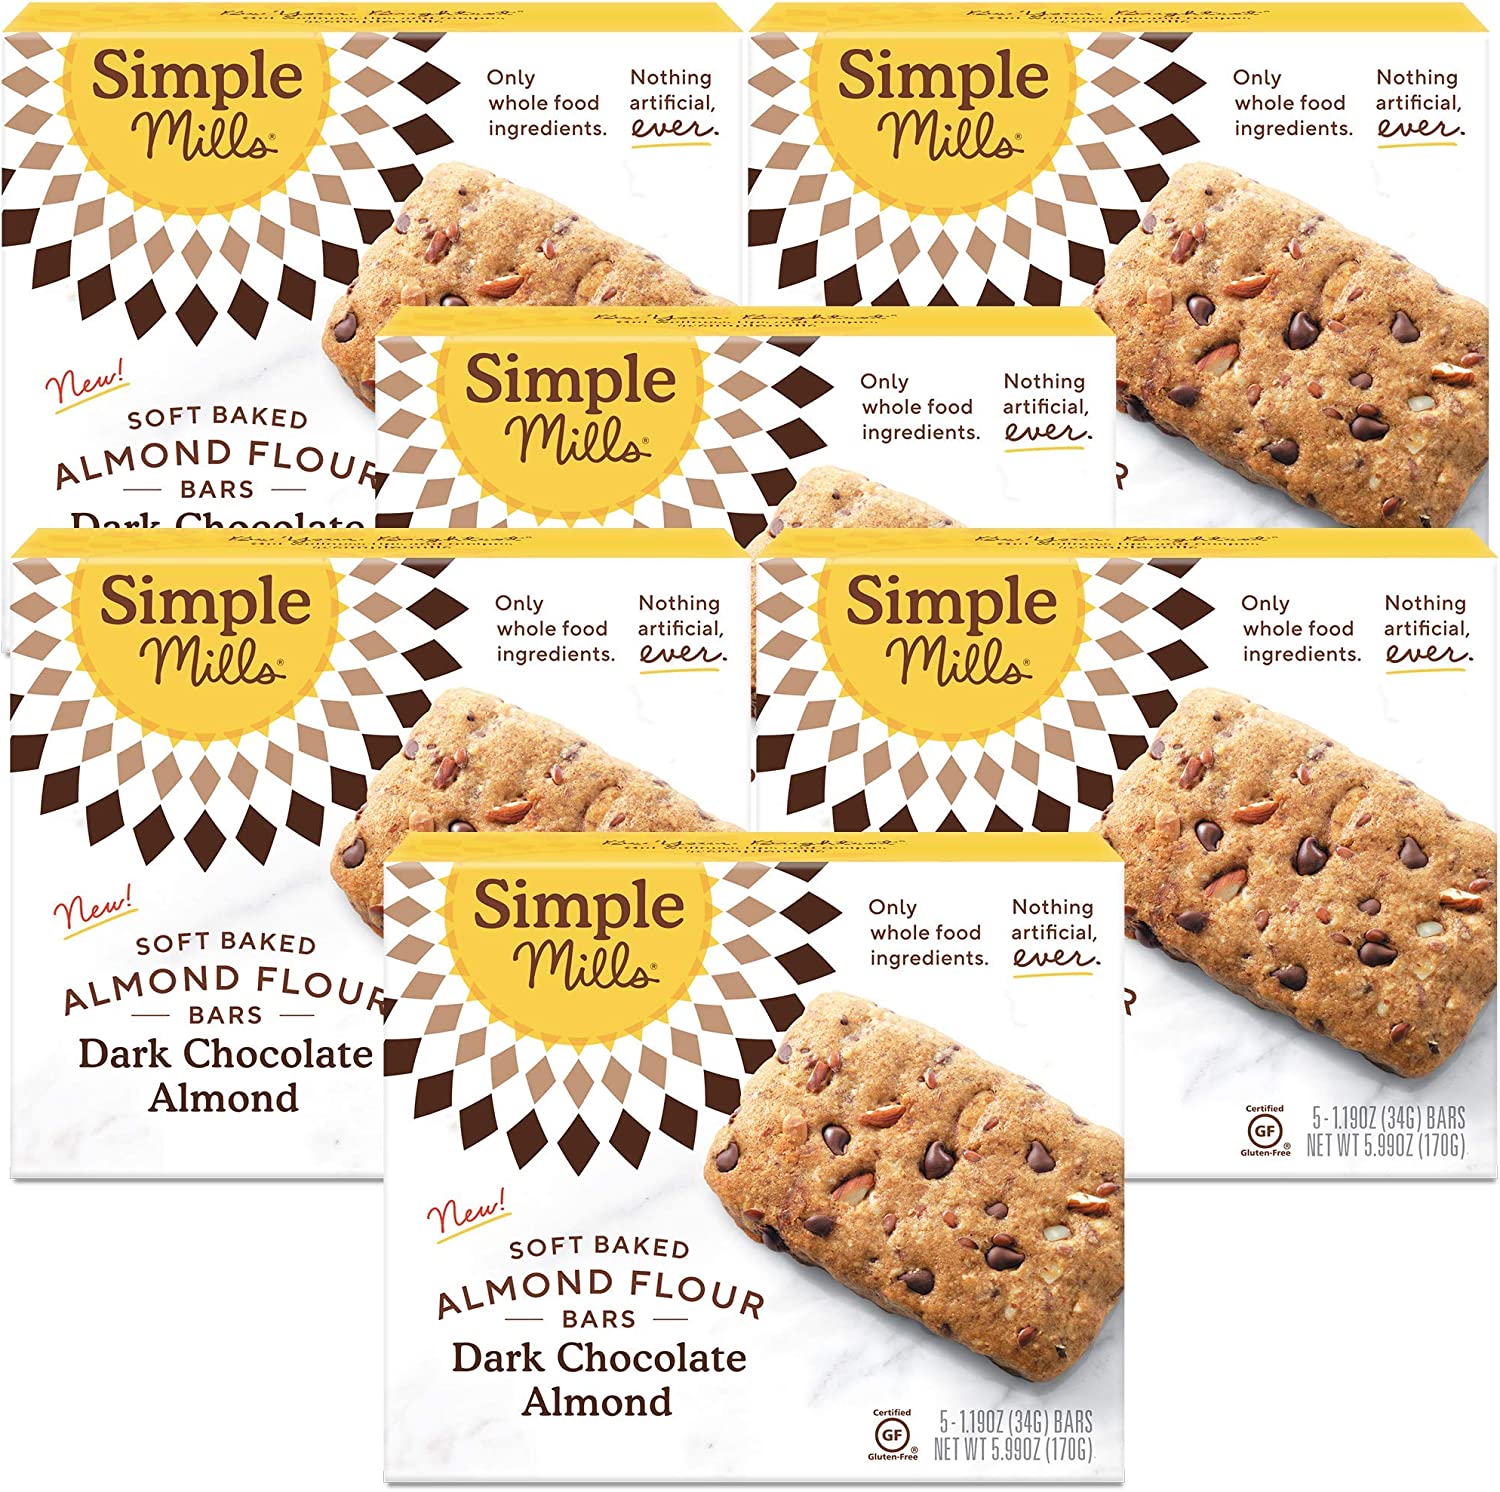 Simple Mills Almond Flour Snack Bars, Dark Chocolate Almond – Gluten Free, Made with Organic Coconut Oil, Breakfast Bars, Healthy Snacks, Paleo Friendly, 6 Ounce (Pack of 6)